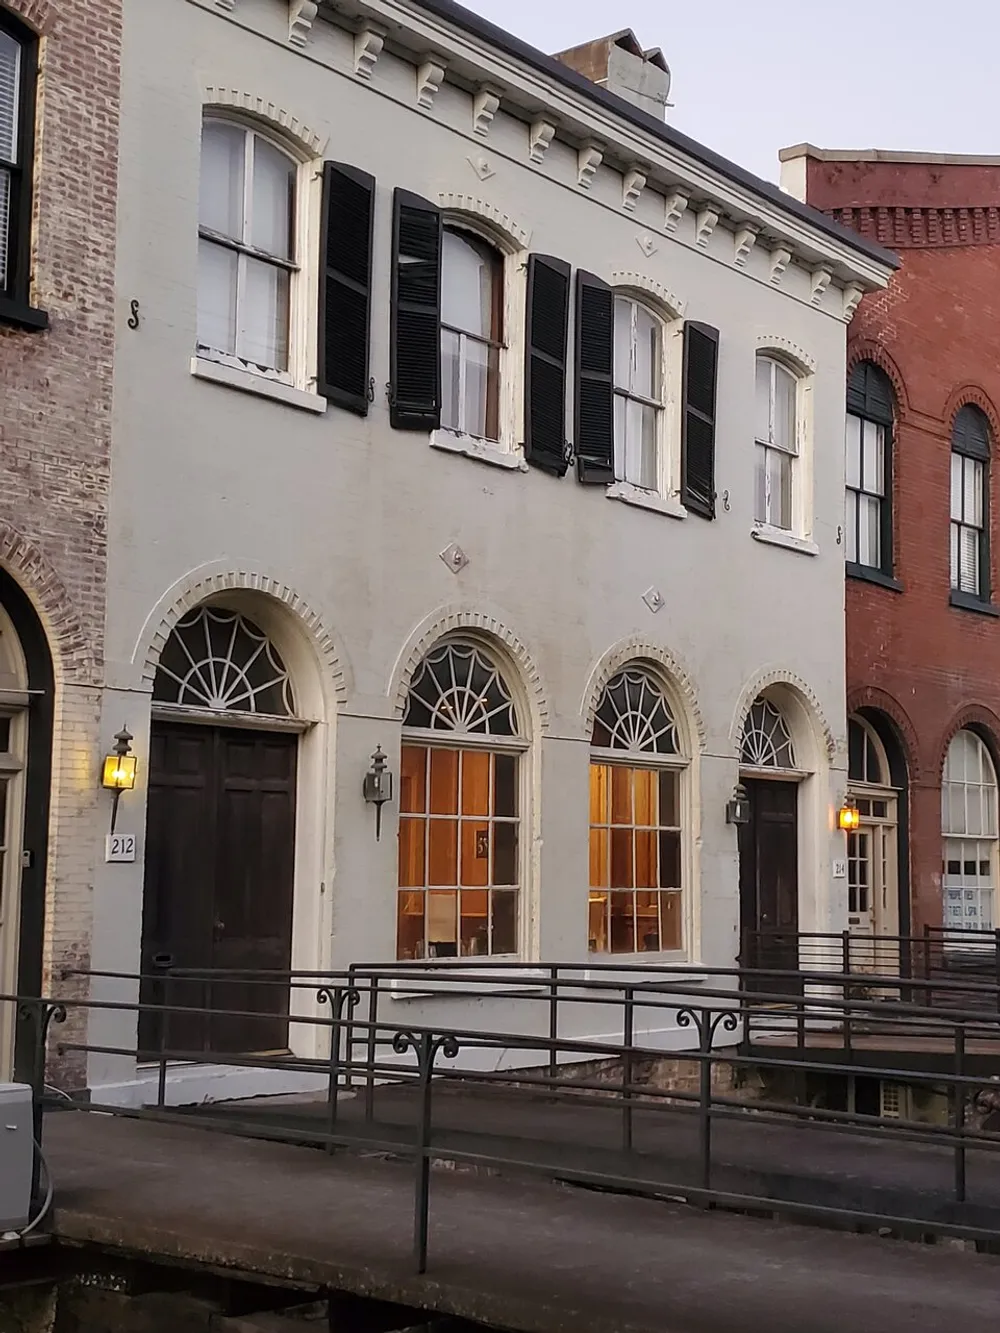 The image shows a two-story building with arched windows and doors black shutters decorative brickwork and a ramp leading to the entrance all suggesting historical architecture captured in the dimming light of dusk